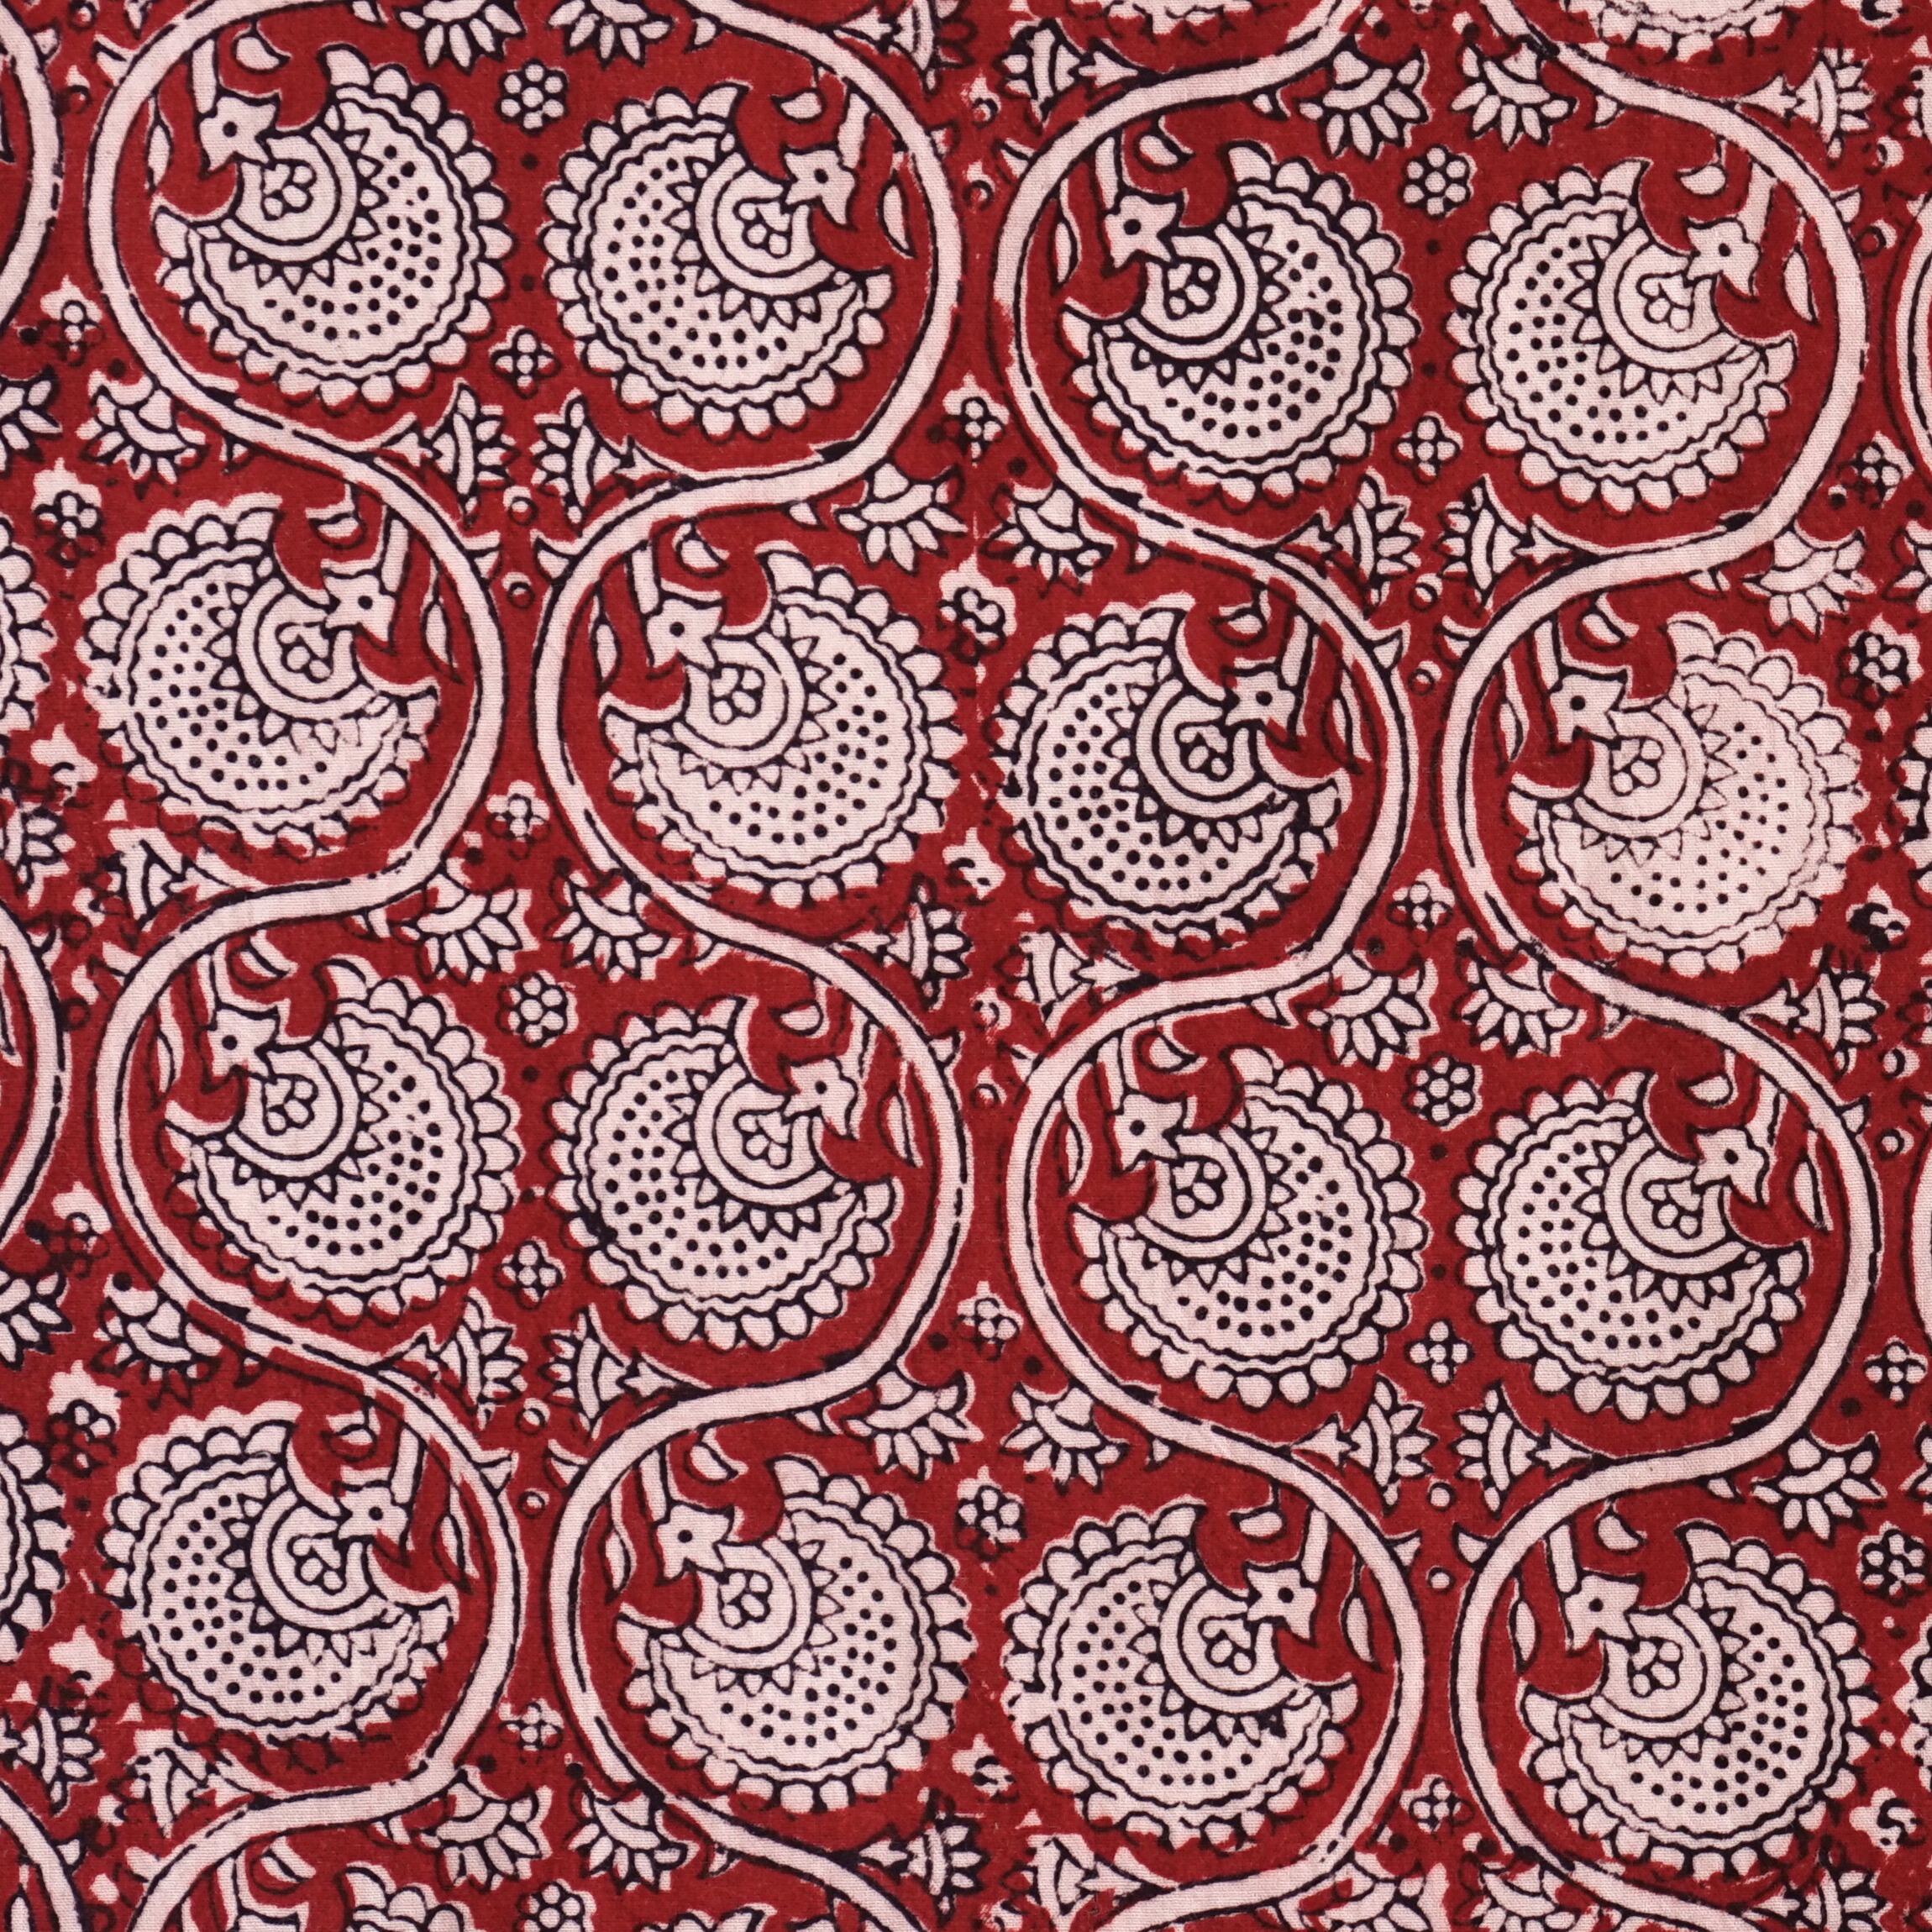 100% Block-Printed Cotton Fabric From India - Idle Moments Design - Iron Rust Black & Alizarin Red Dyes - Flat